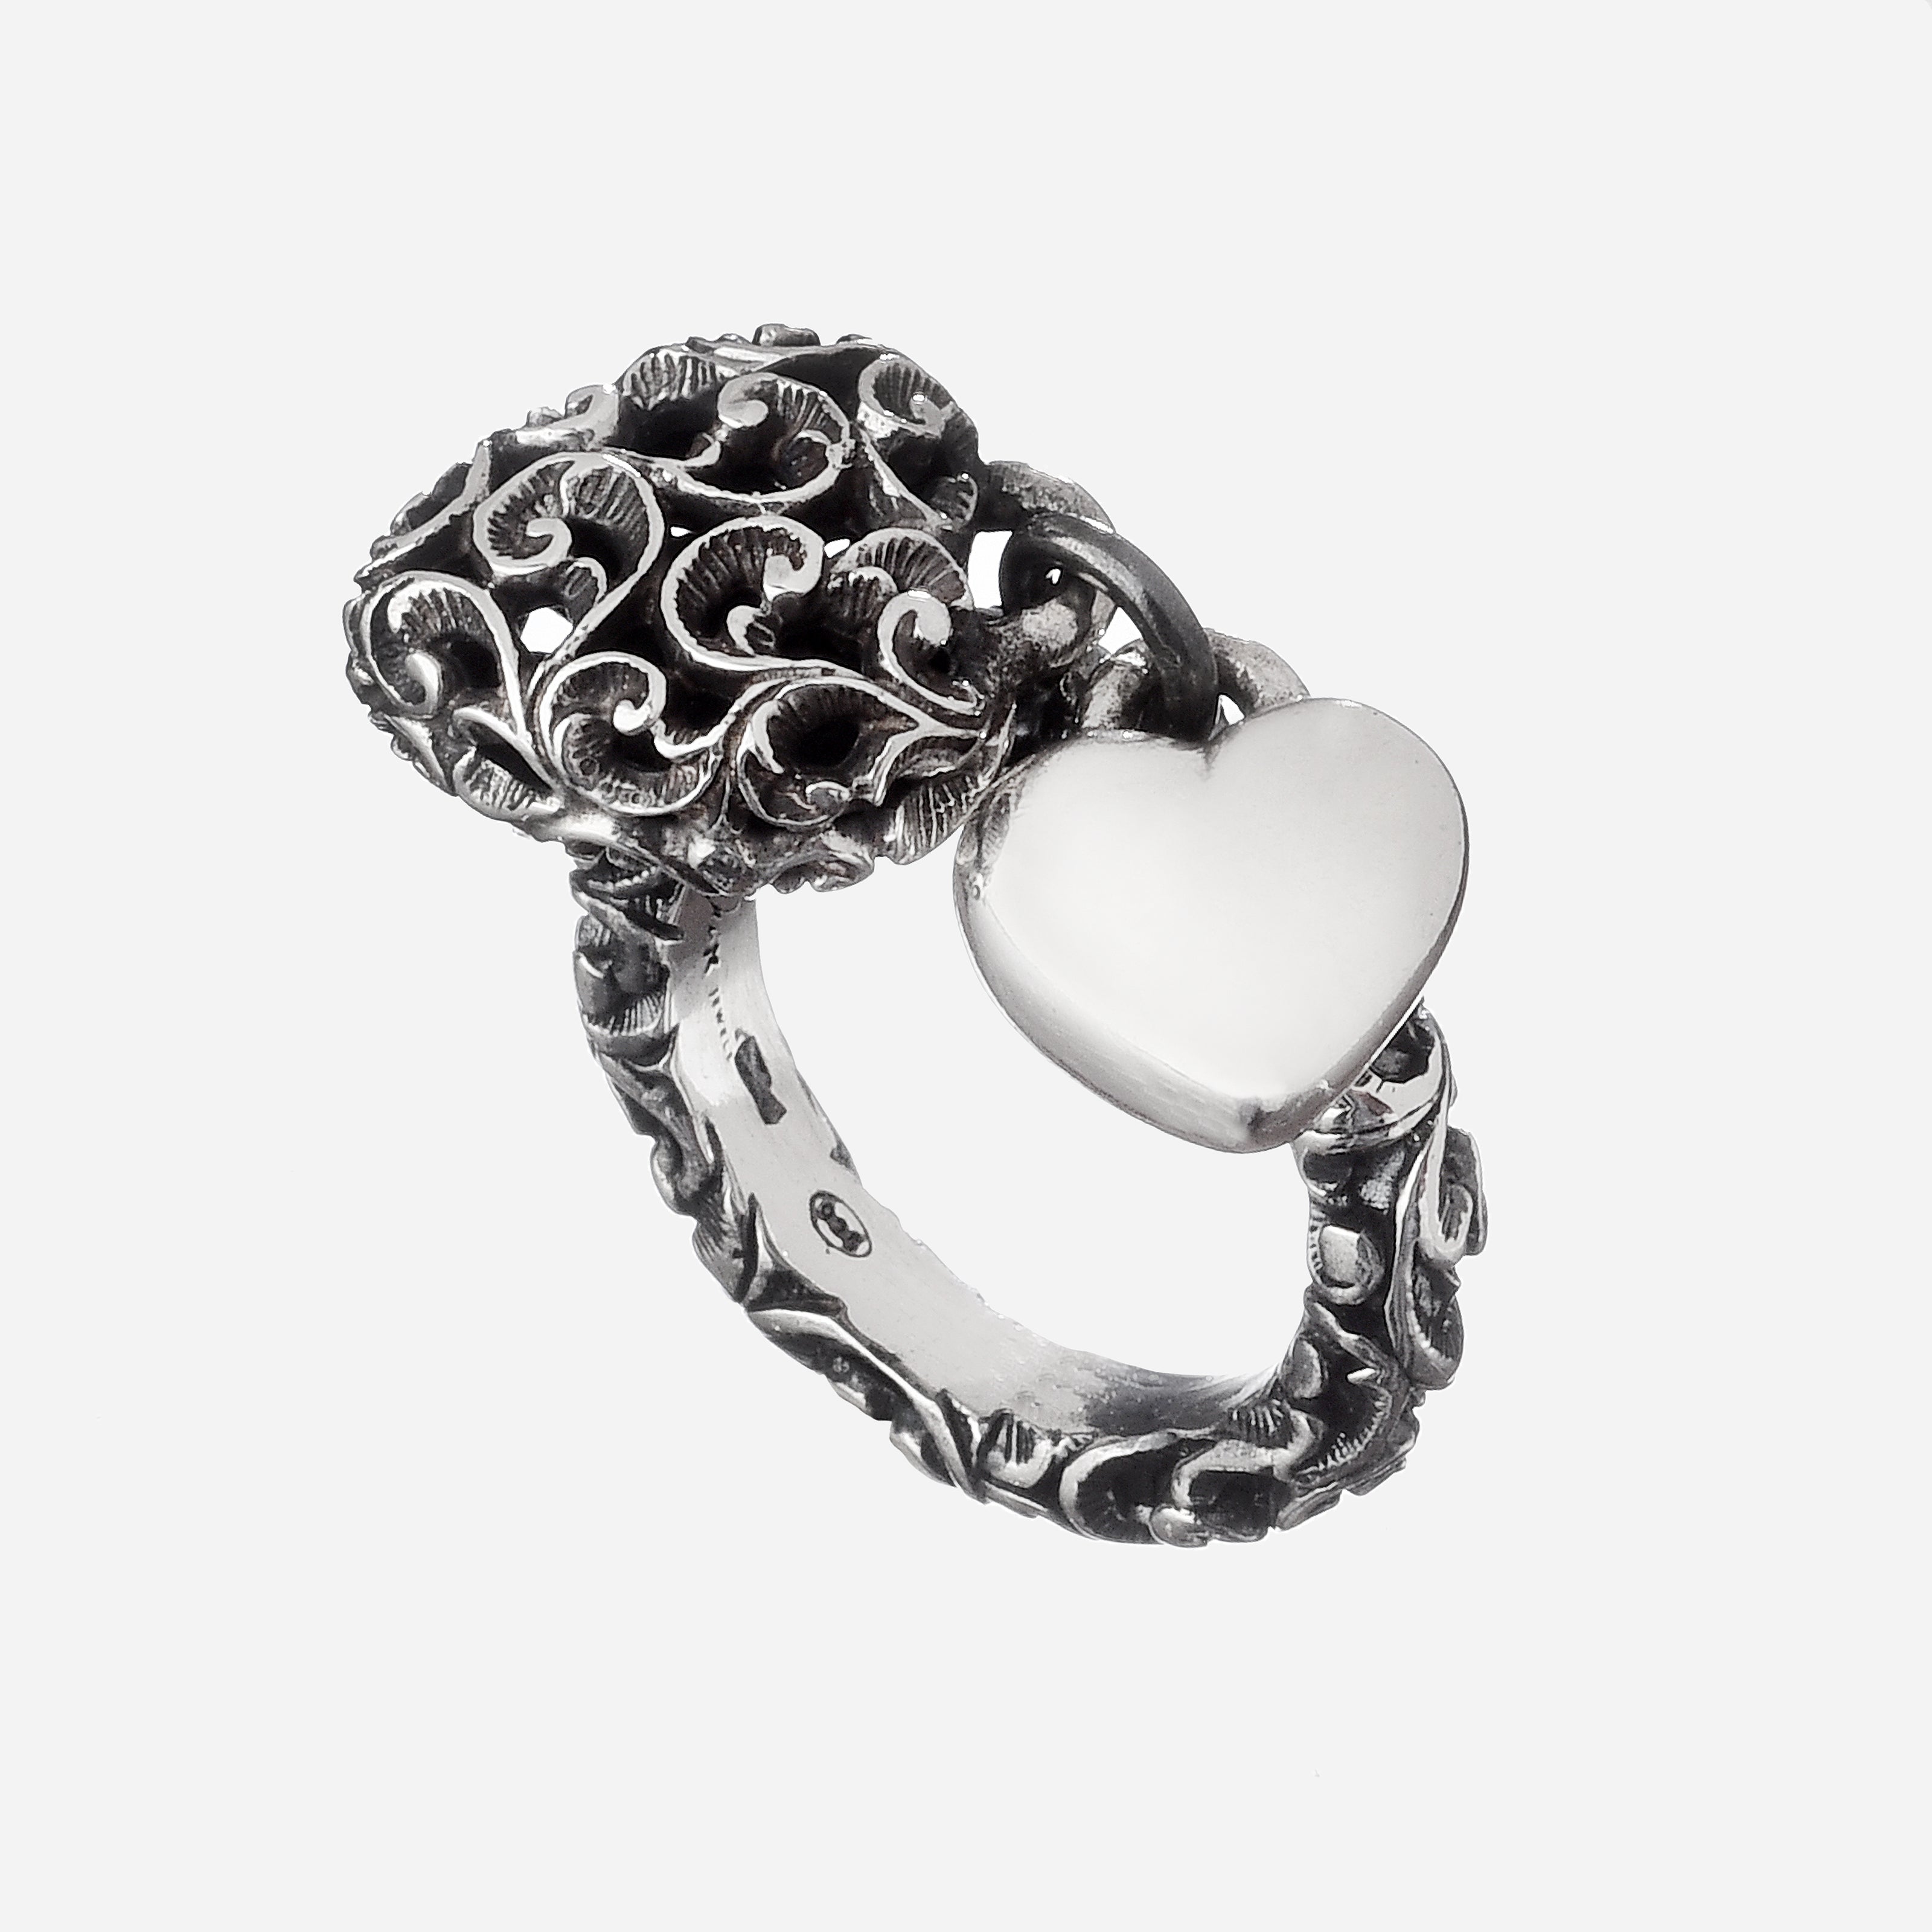 Shakti Love ring with two hearts